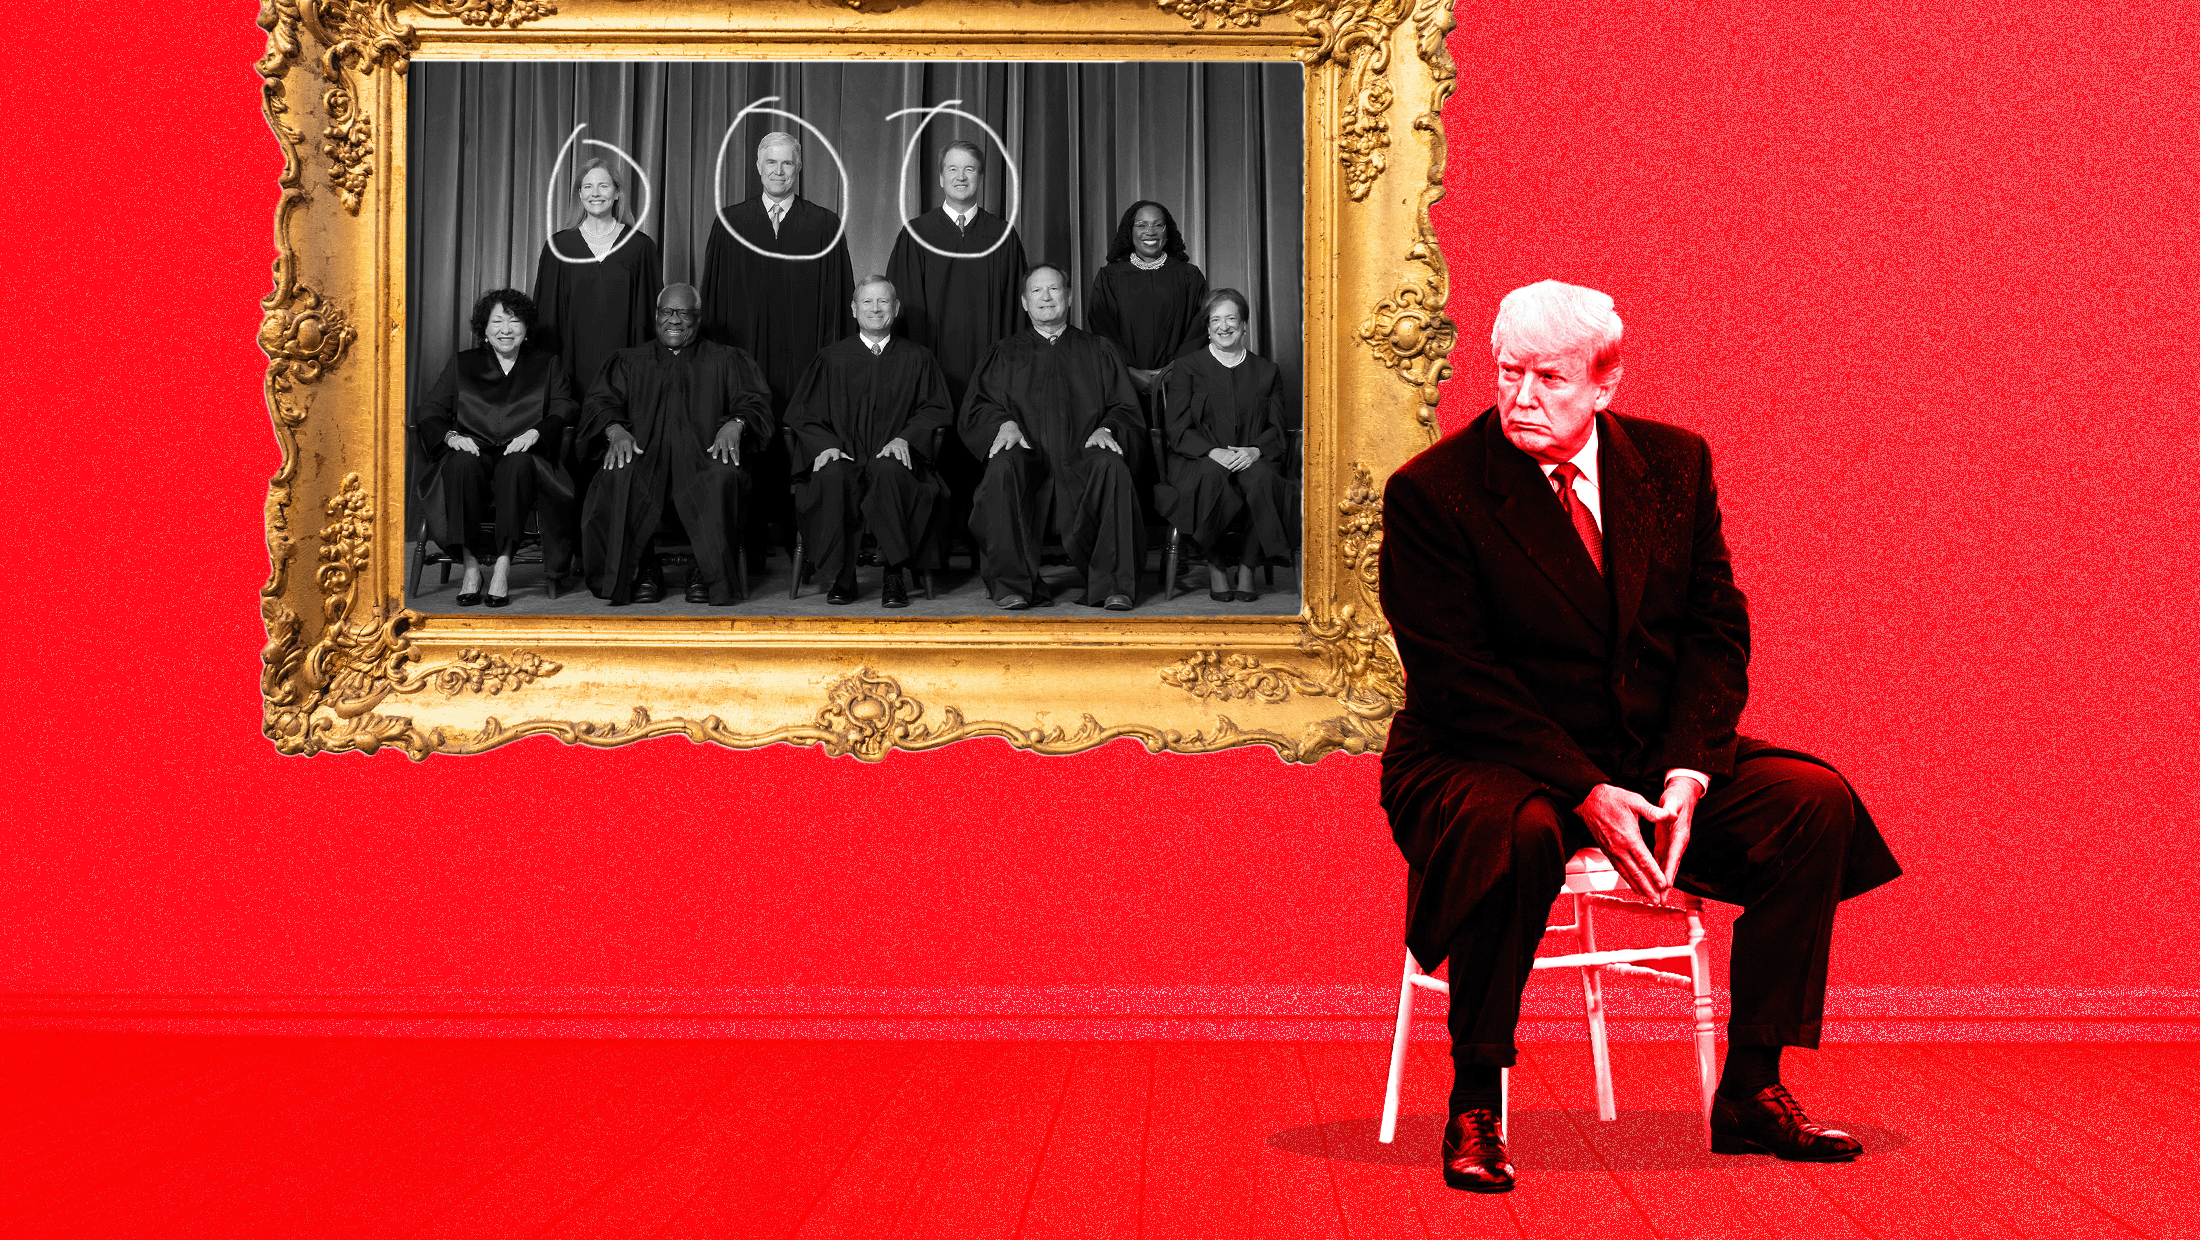 Red background with an image of Donald Trump sitting on a white stool, in front of a photo of all nine justices, with Amy Coney Barrett, Neil Gorsuch and Brett Kavanaugh circled in the photo.